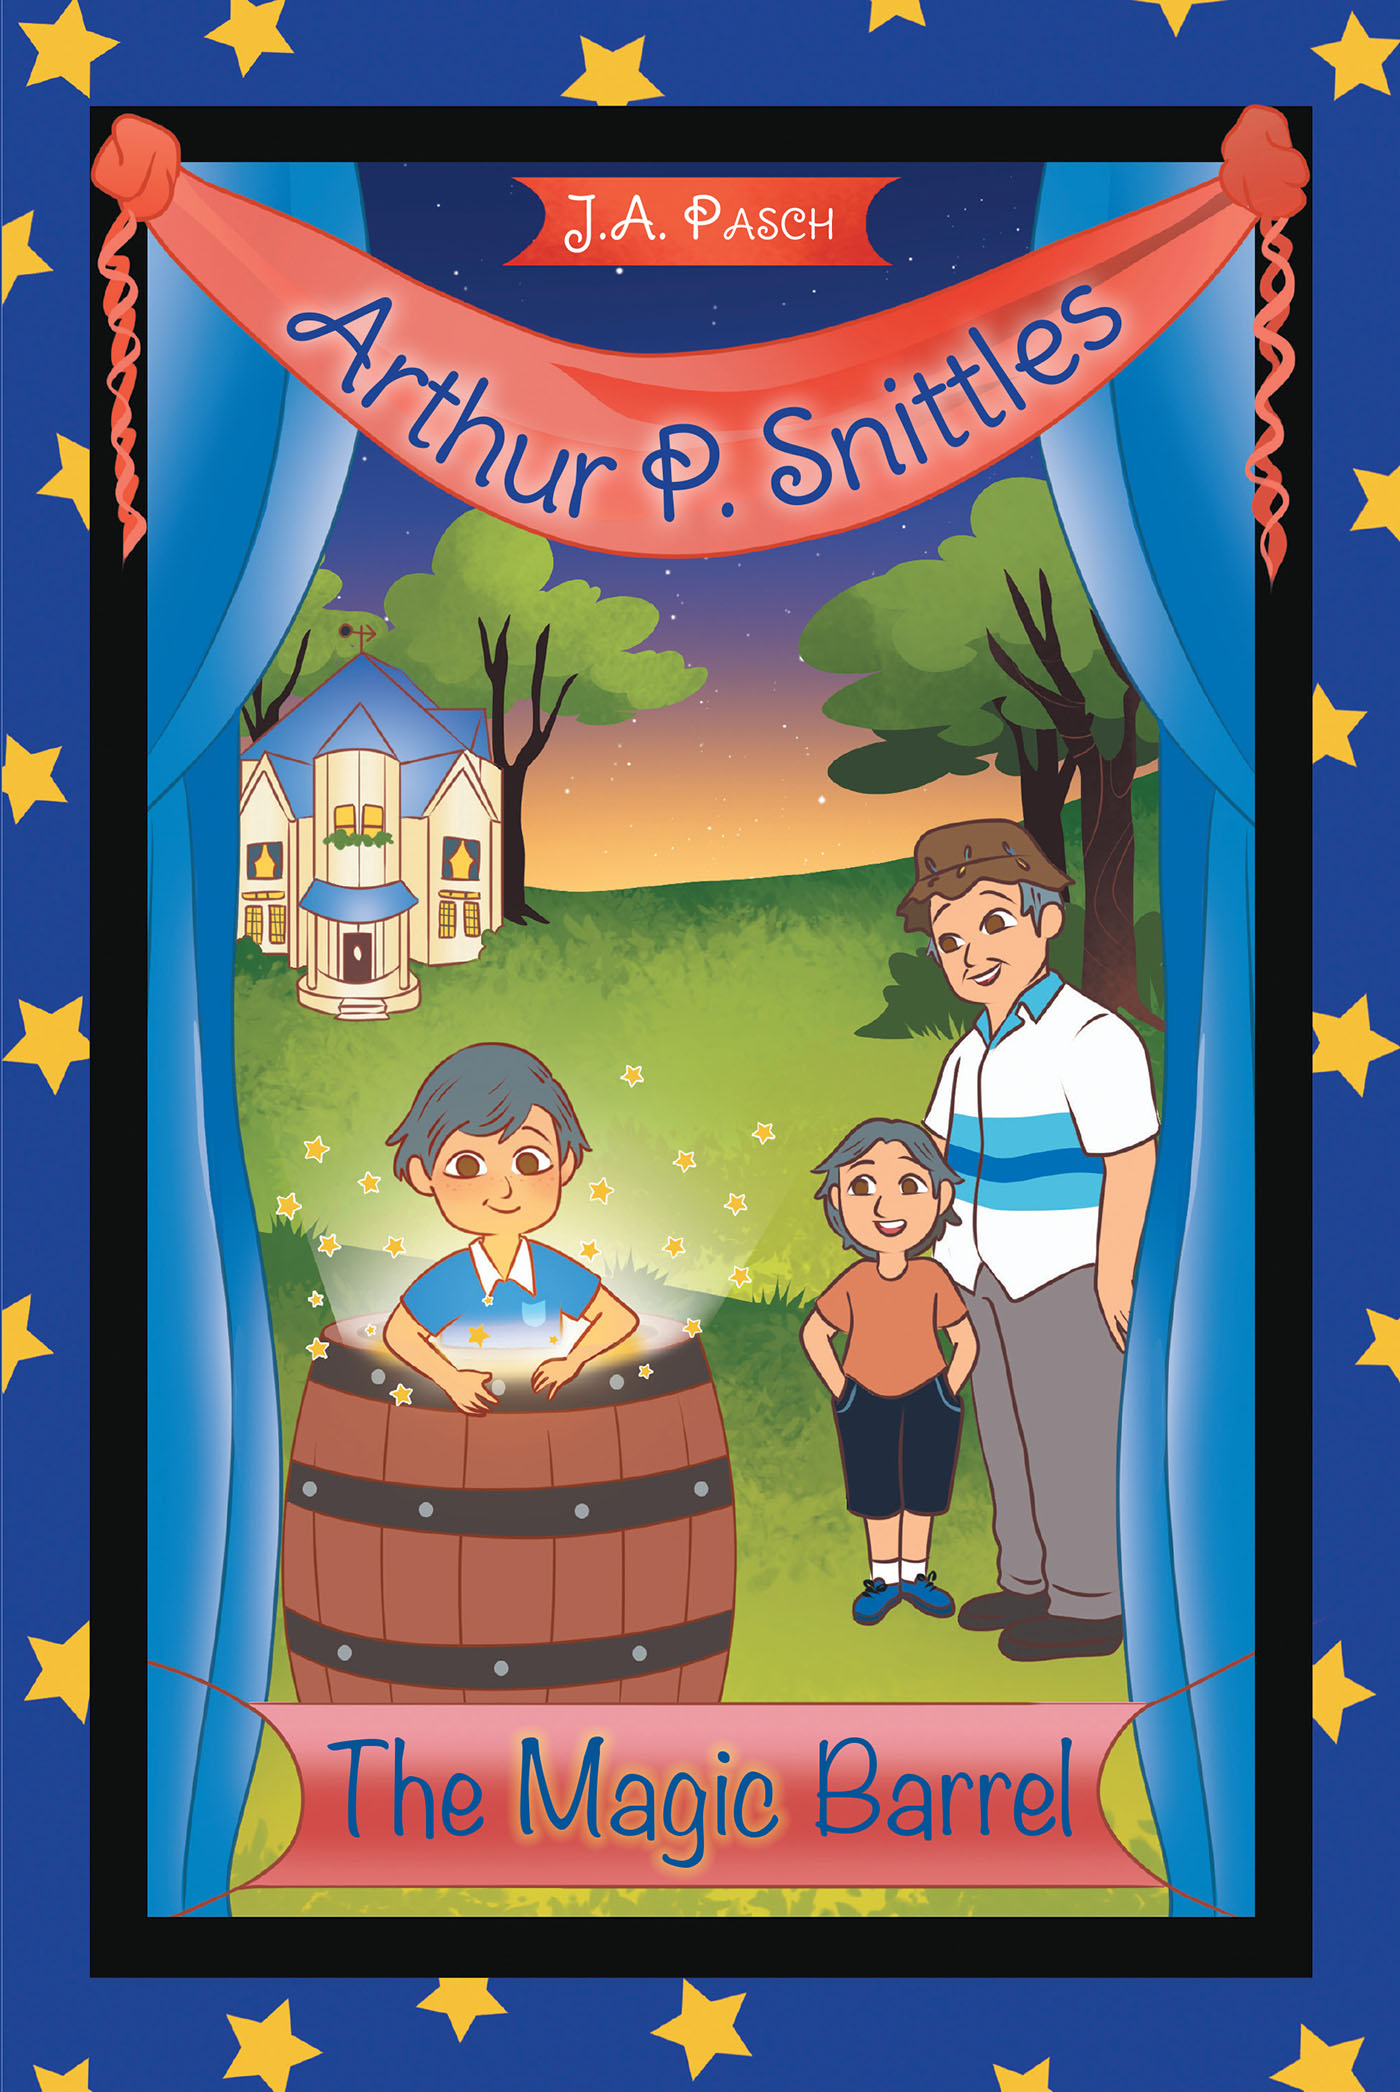 J.A. Pasch’s Newly Released “Arthur P. Snittles: The Magic Barrel” is a Quick-Witted Adventure That Will Delight and Entertain